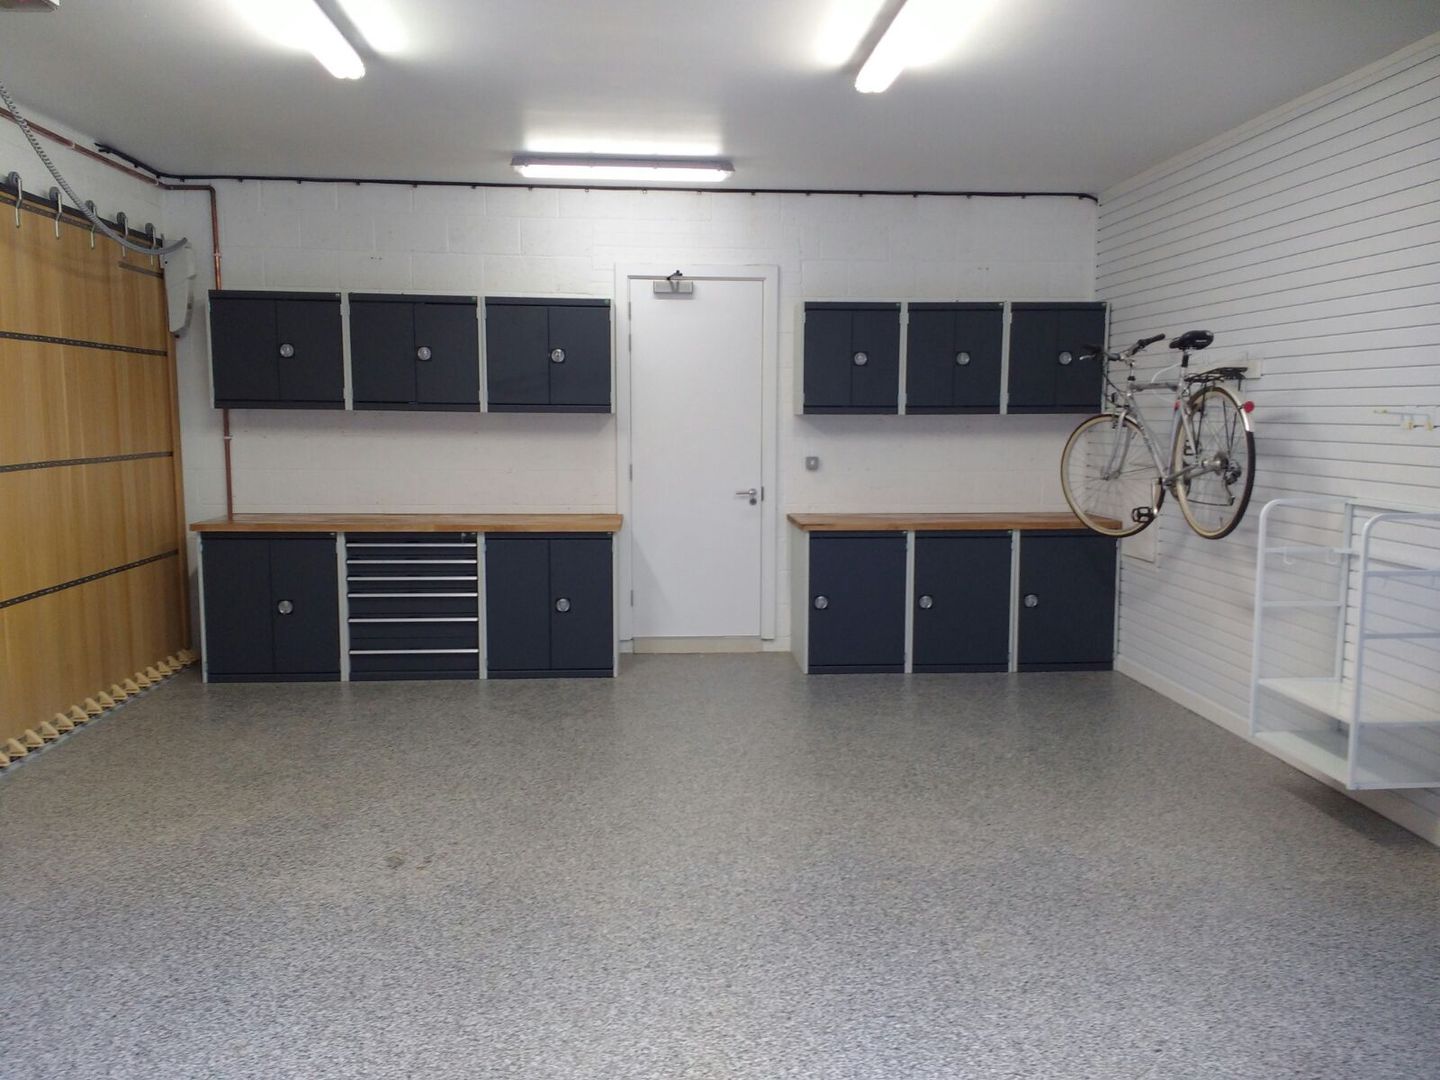 Resin Floor, Metal Cabinets and Bike Storage Galore in this lovely garage makeover in Cambridge Garageflex Garage/shed garage,built-in storage,fitted,storage,garage door,metal,cabinet,cupboard,wall paneling,floor,resin,bike